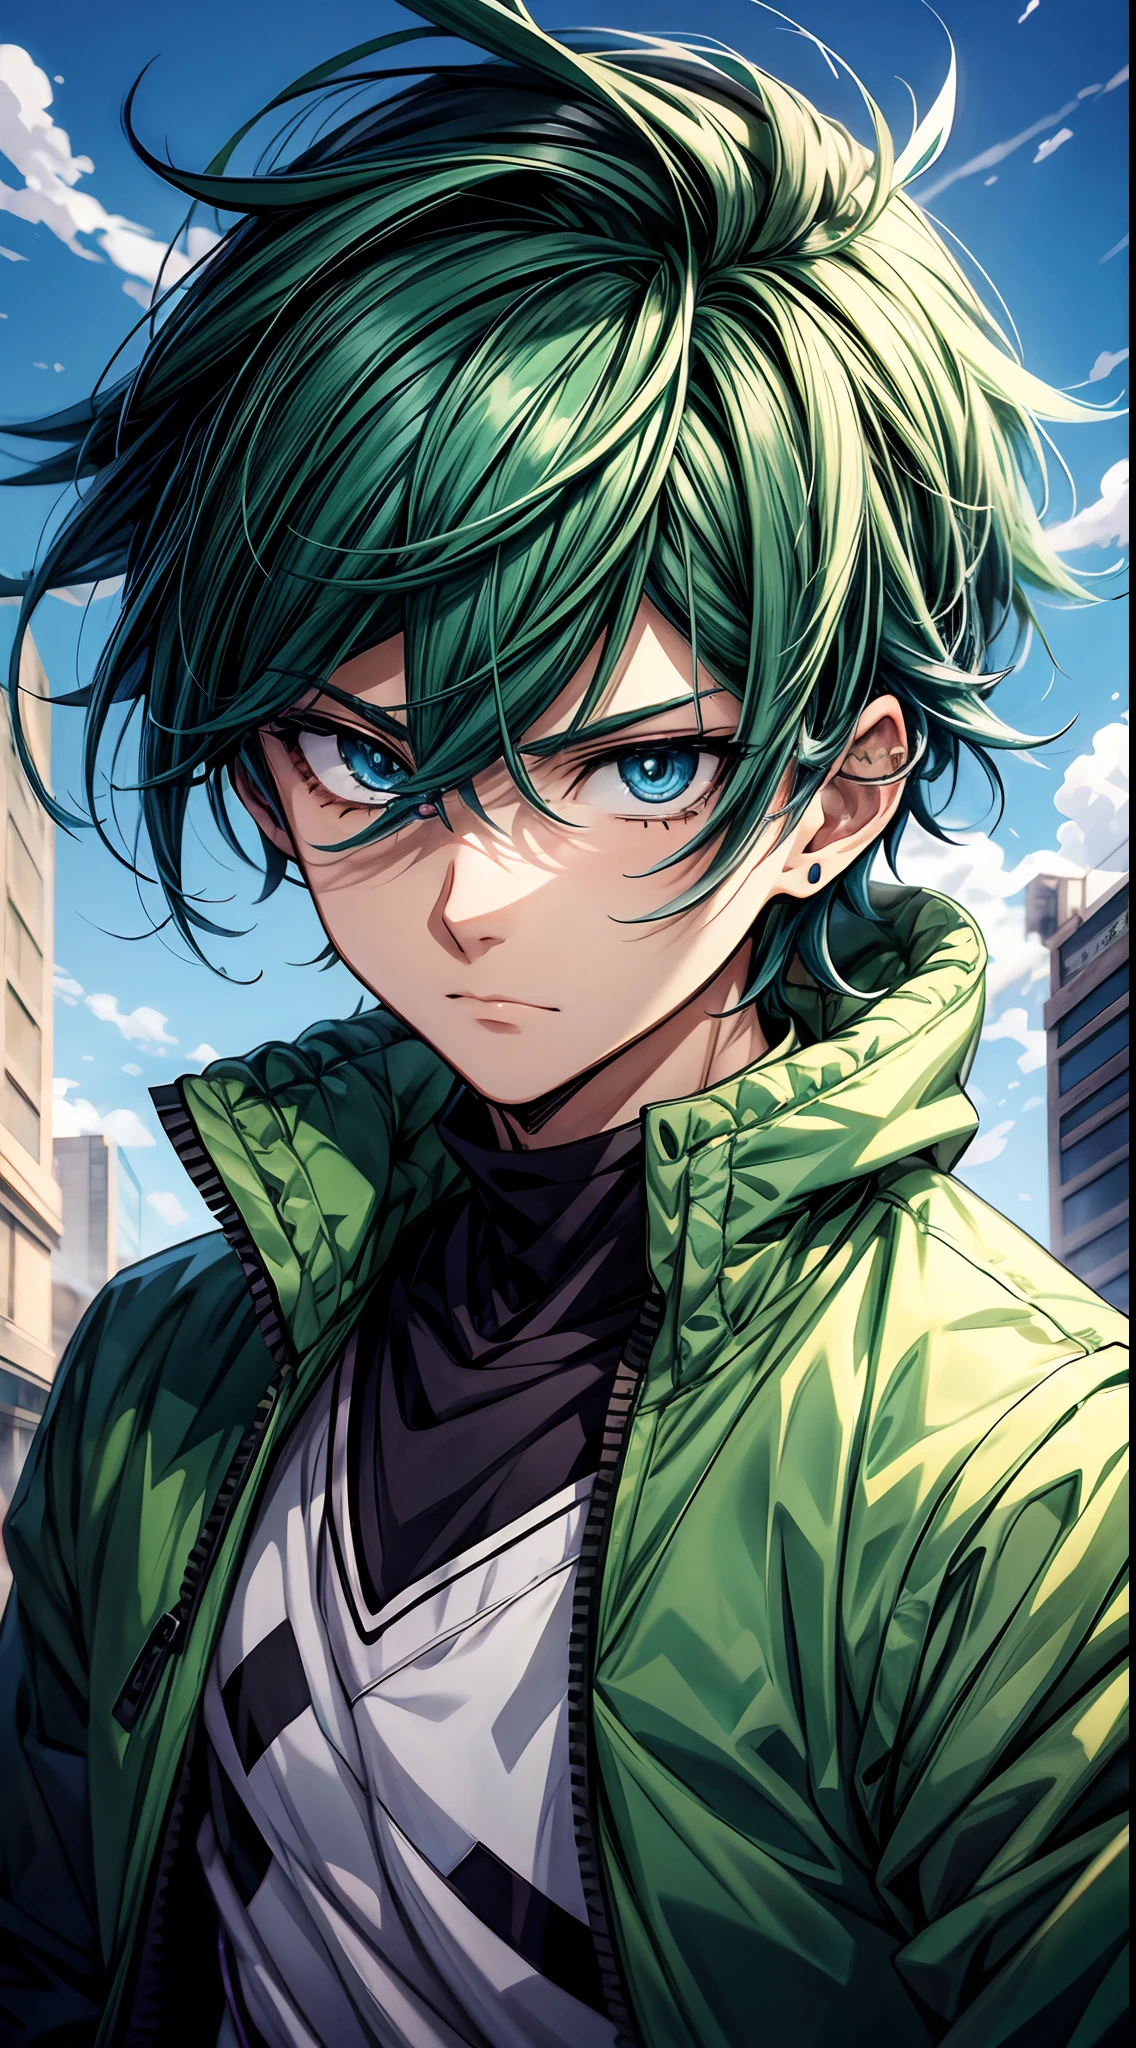 a cartoon boy with a green jacket and blue hair pointing up, red eyes,  trigger anime artstyle, high quality anime artstyle, in an anime style -  SeaArt AI